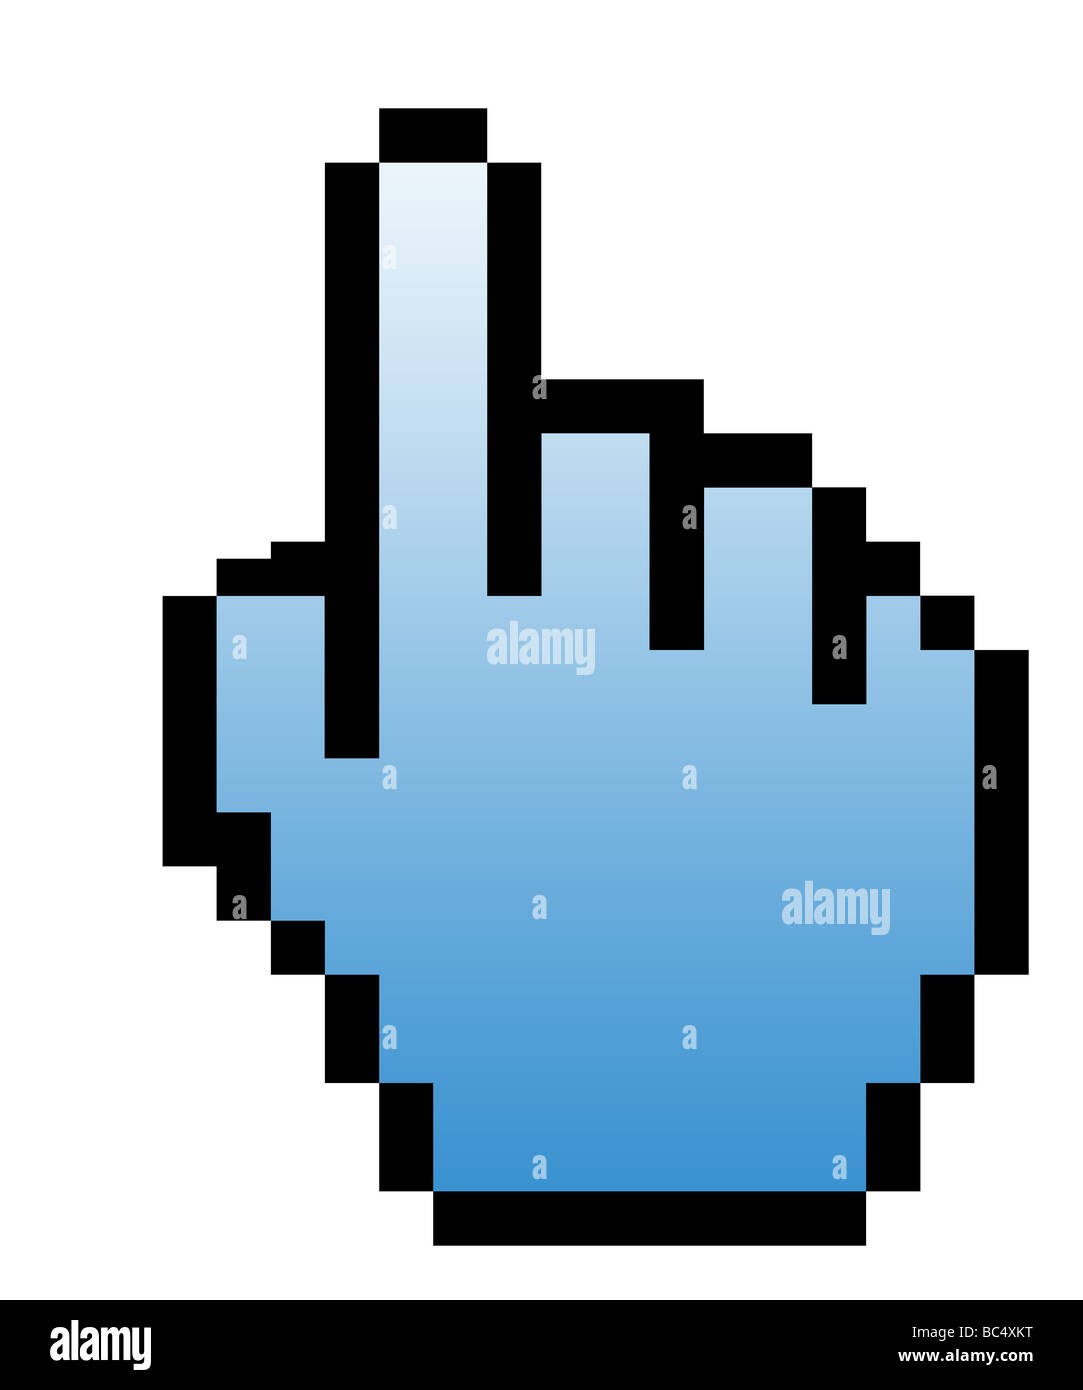 Black pointing hand computer icon symbol isolated over white background Stock Photo